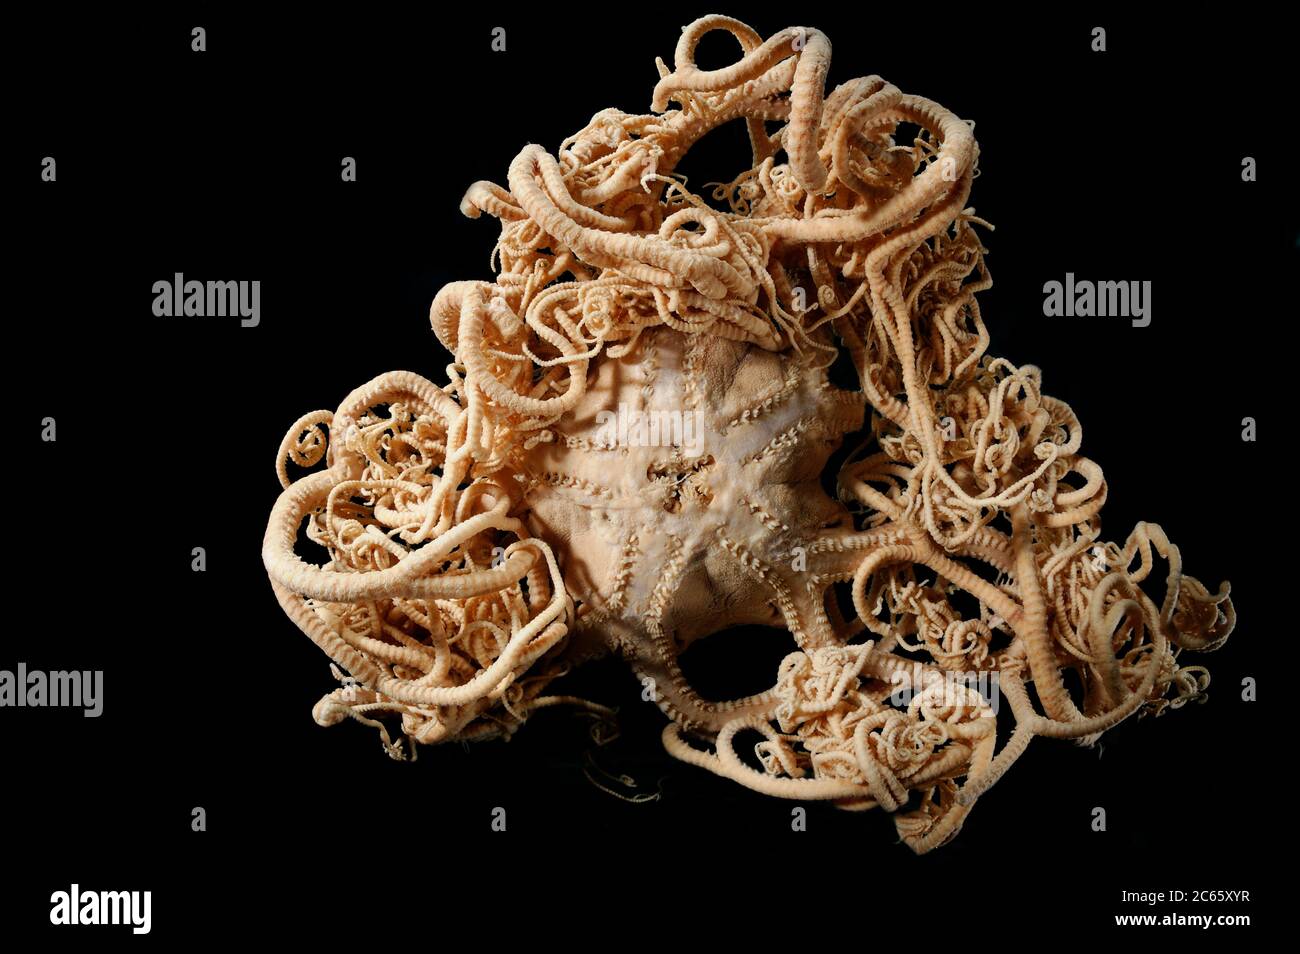 Brittle star (Gorgonocephalus lamarckii) Picture was taken in cooperation with the Zoological Museum University of Hamburg Stock Photo